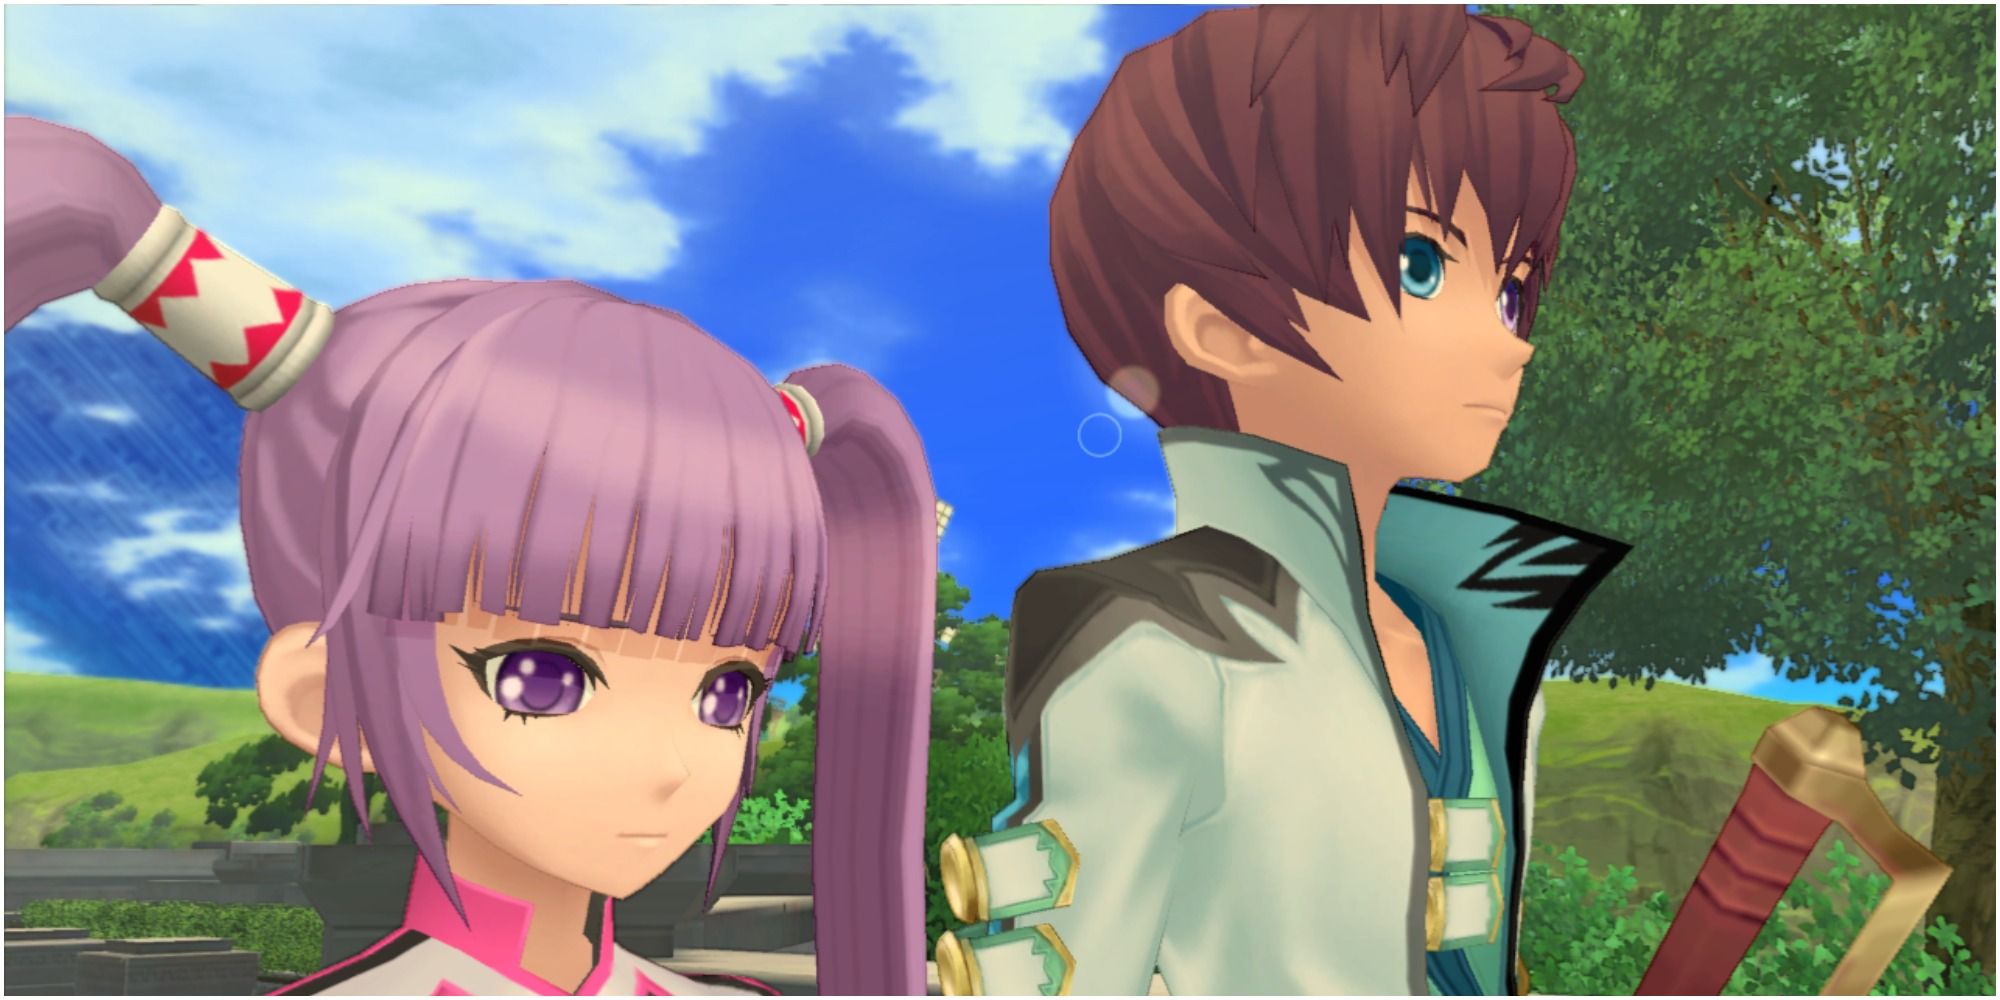 Asbel and Sophie in Tales of Graces F